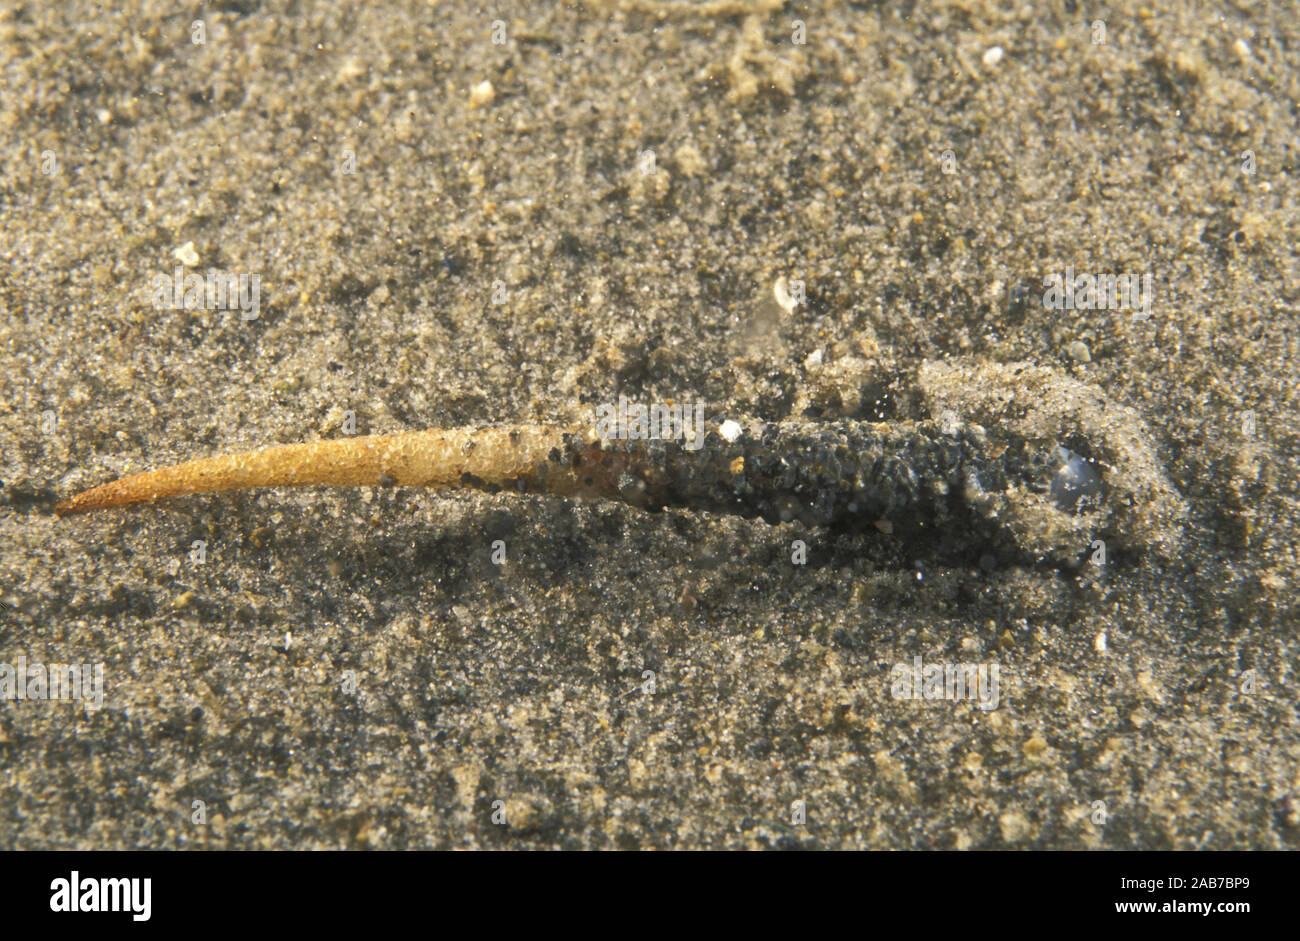 Tubeworm (Pectinaria sp.), polychaete worm that builds a rigid tube by cementing sand grains together, and carries it about as it moves over and throu Stock Photo